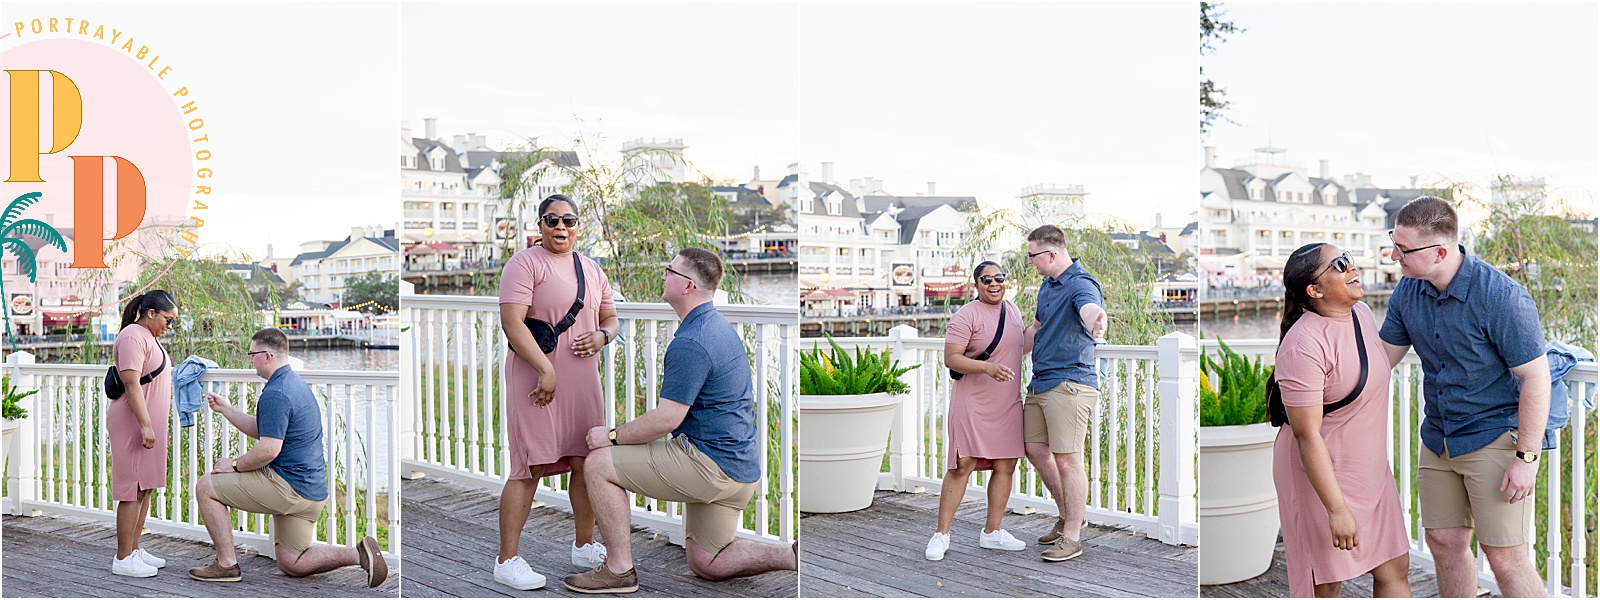 A breathtaking sunset at Seabreeze Point, Disney's BoardWalk Resort, casting warm hues over the romantic proposal setting.